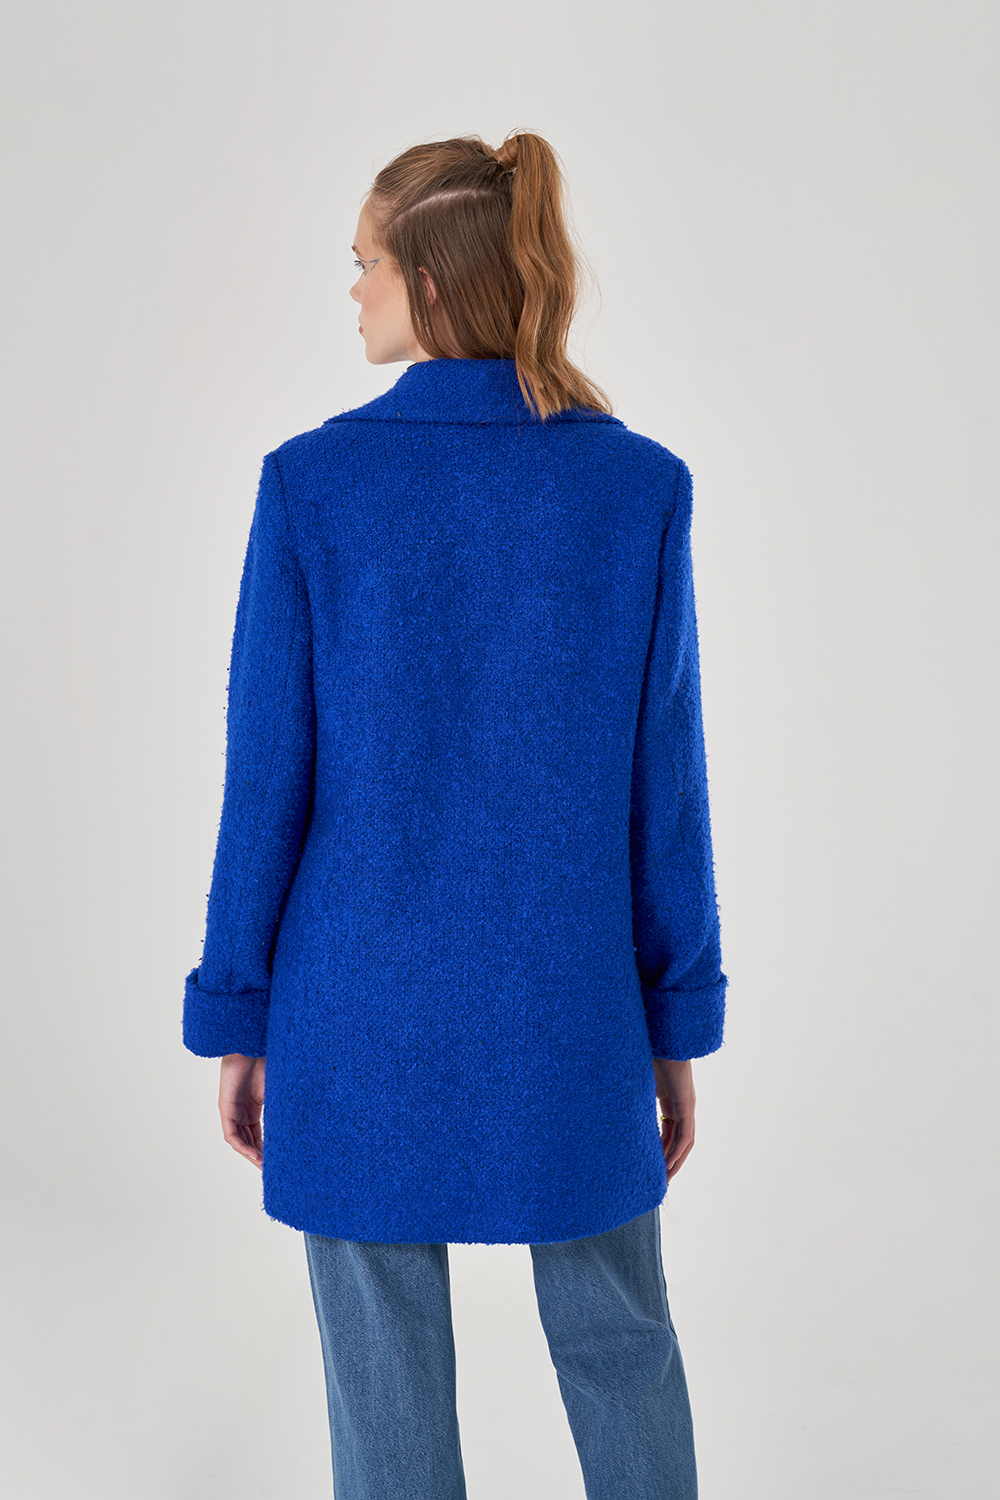 Boucle Textured Sax Blue Overcoat